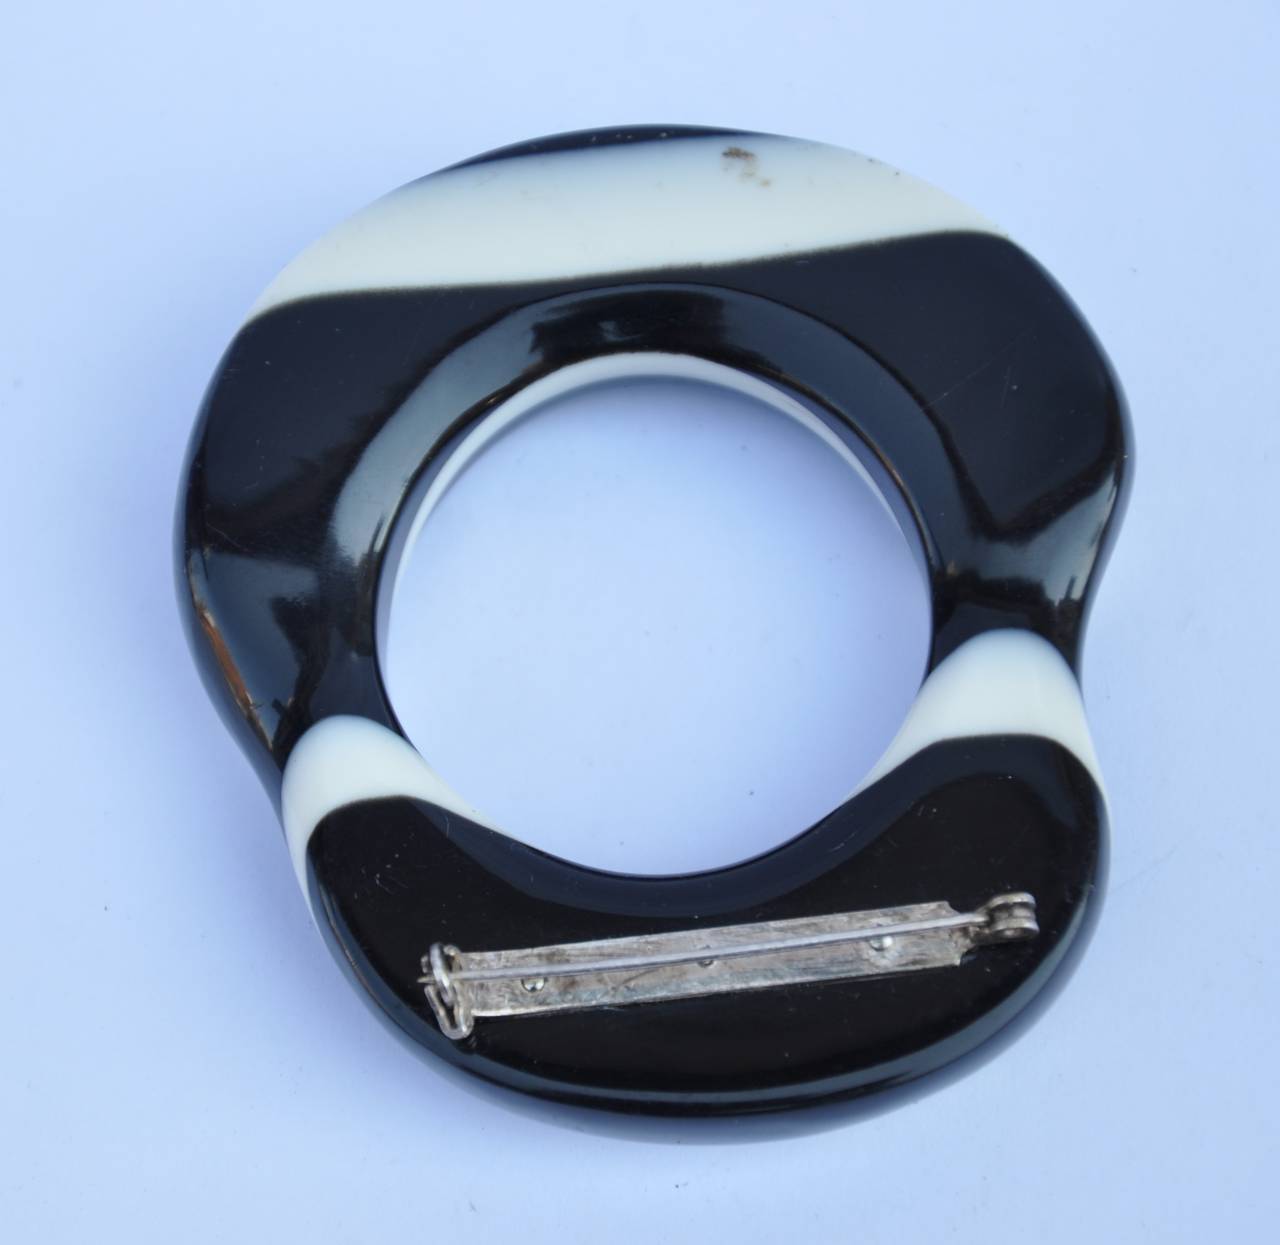 This huge black & white "Swirl" lucite brooch measures 3" x 2 5/8" with a thickness of 1/2".